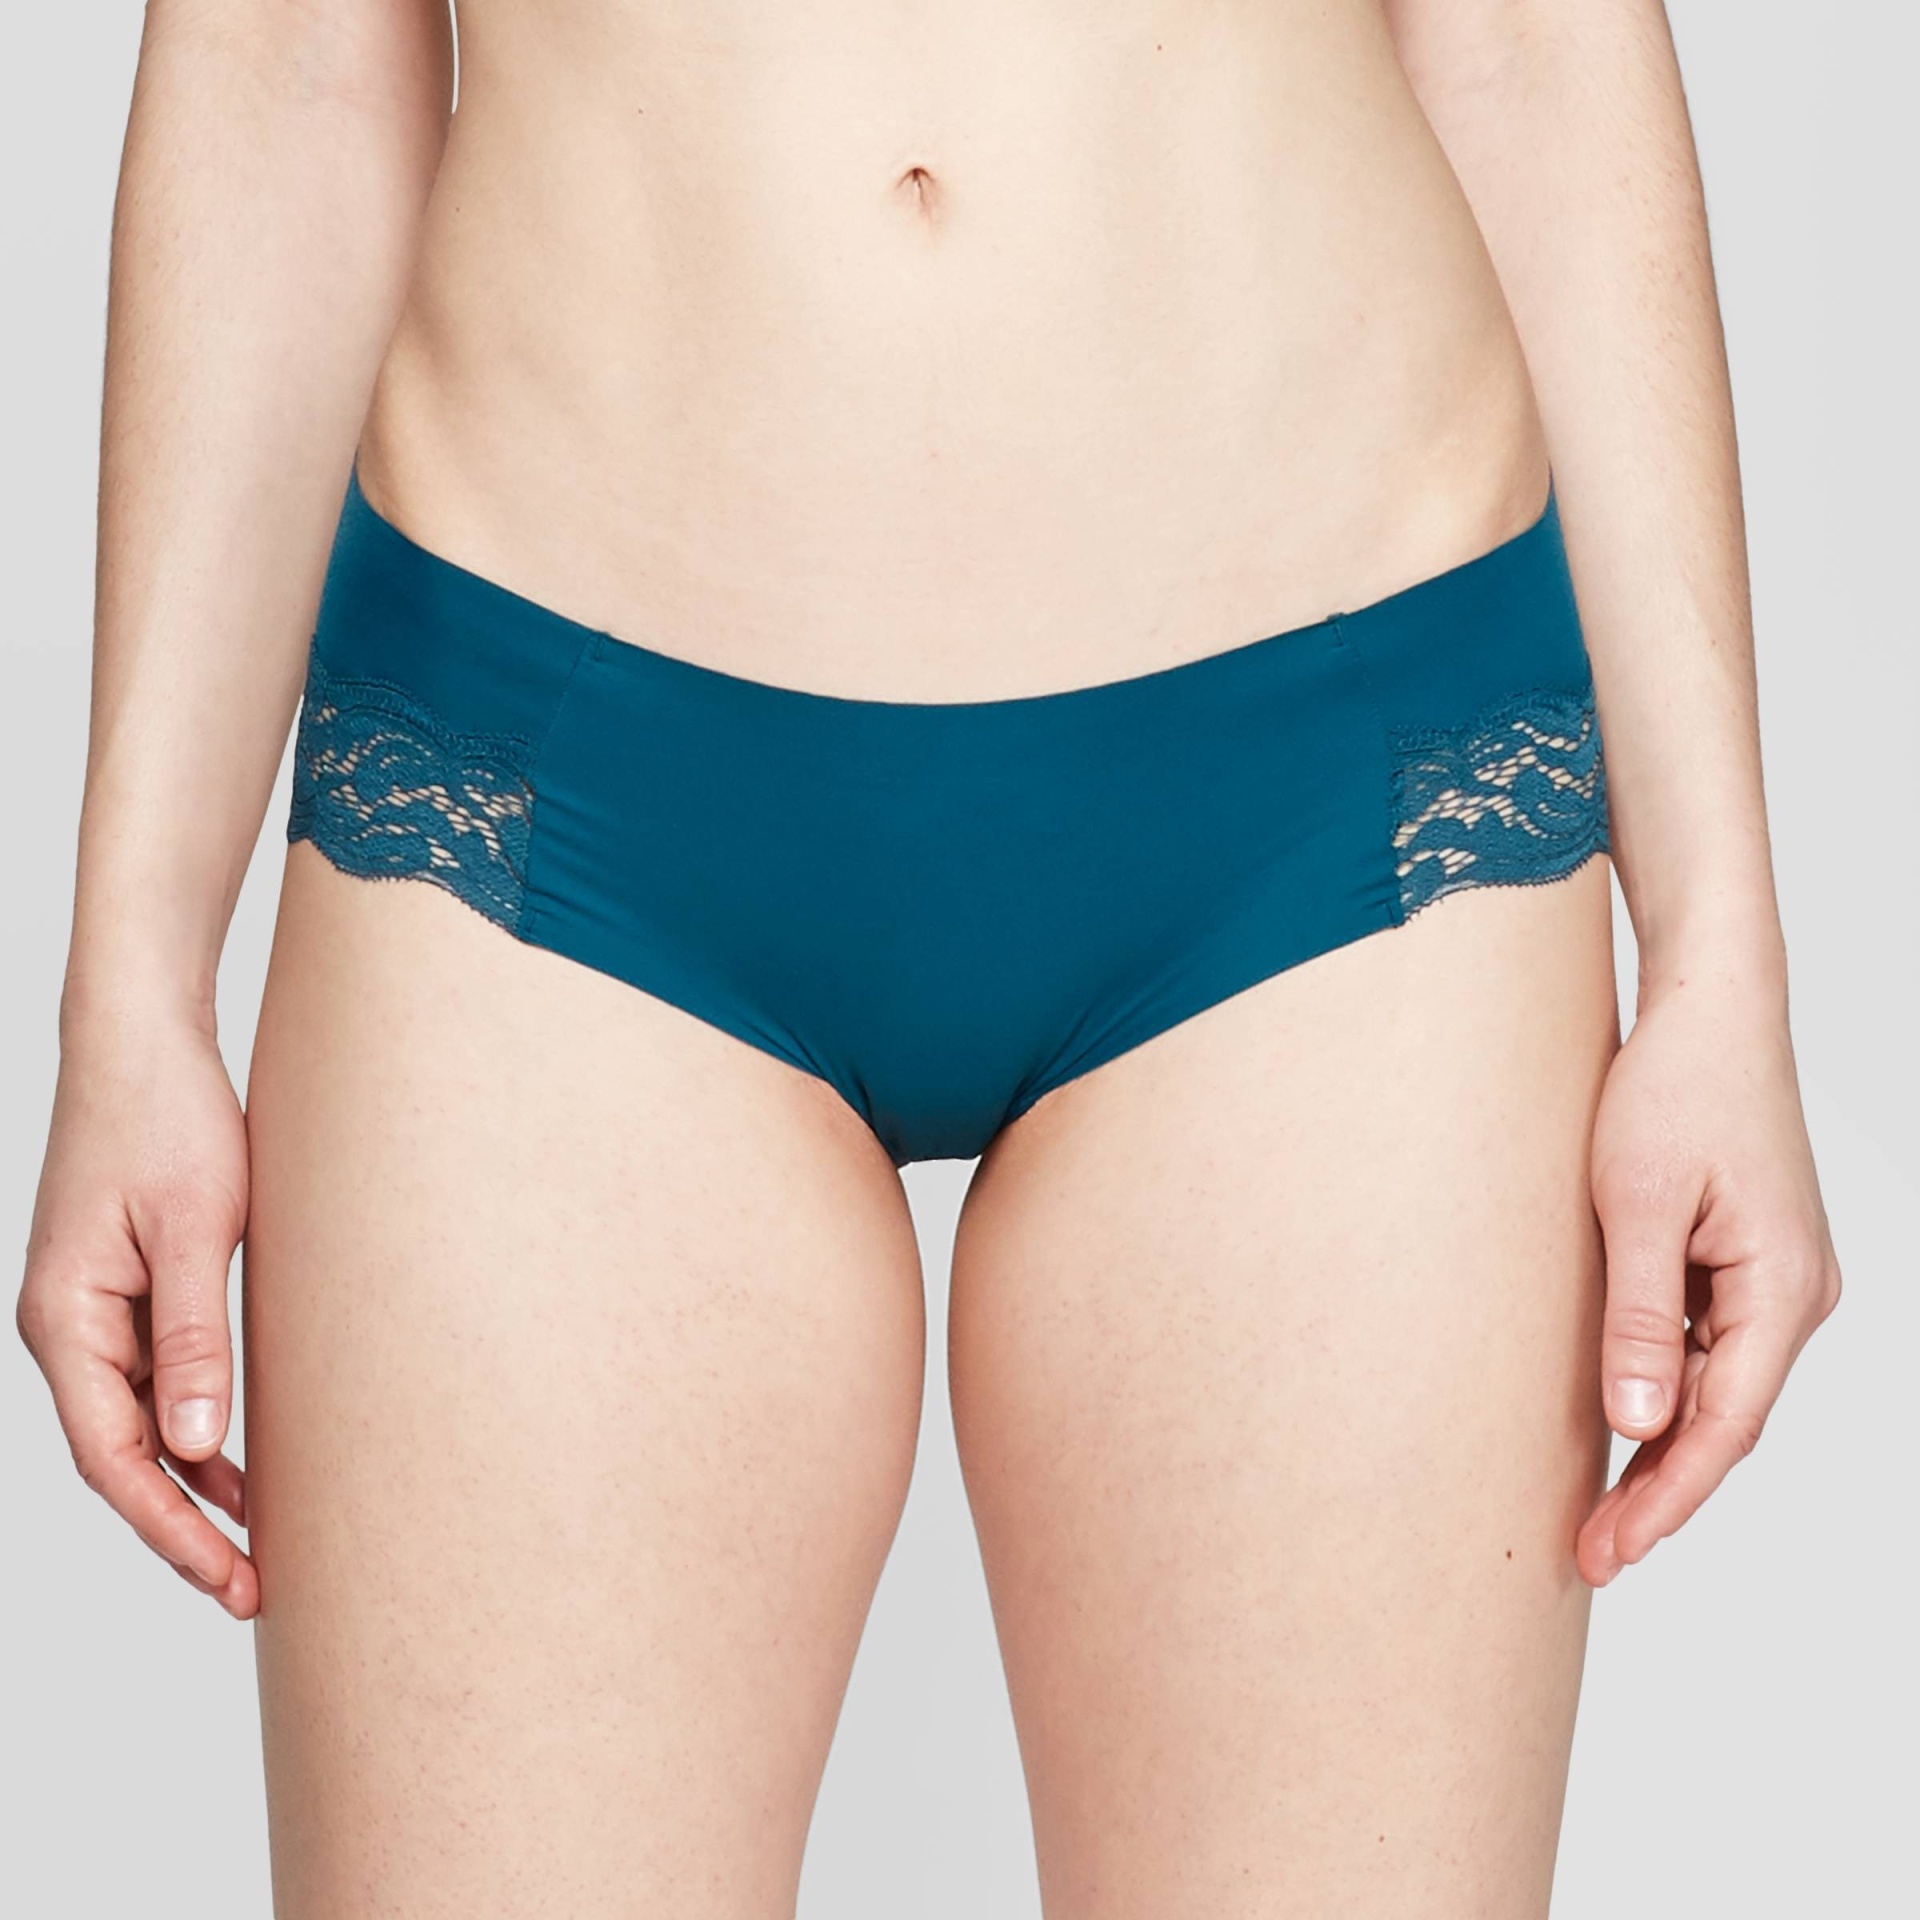 Women's Laser Cut Cheeky Underwear with Lace - Auden English Teal M 1 ct